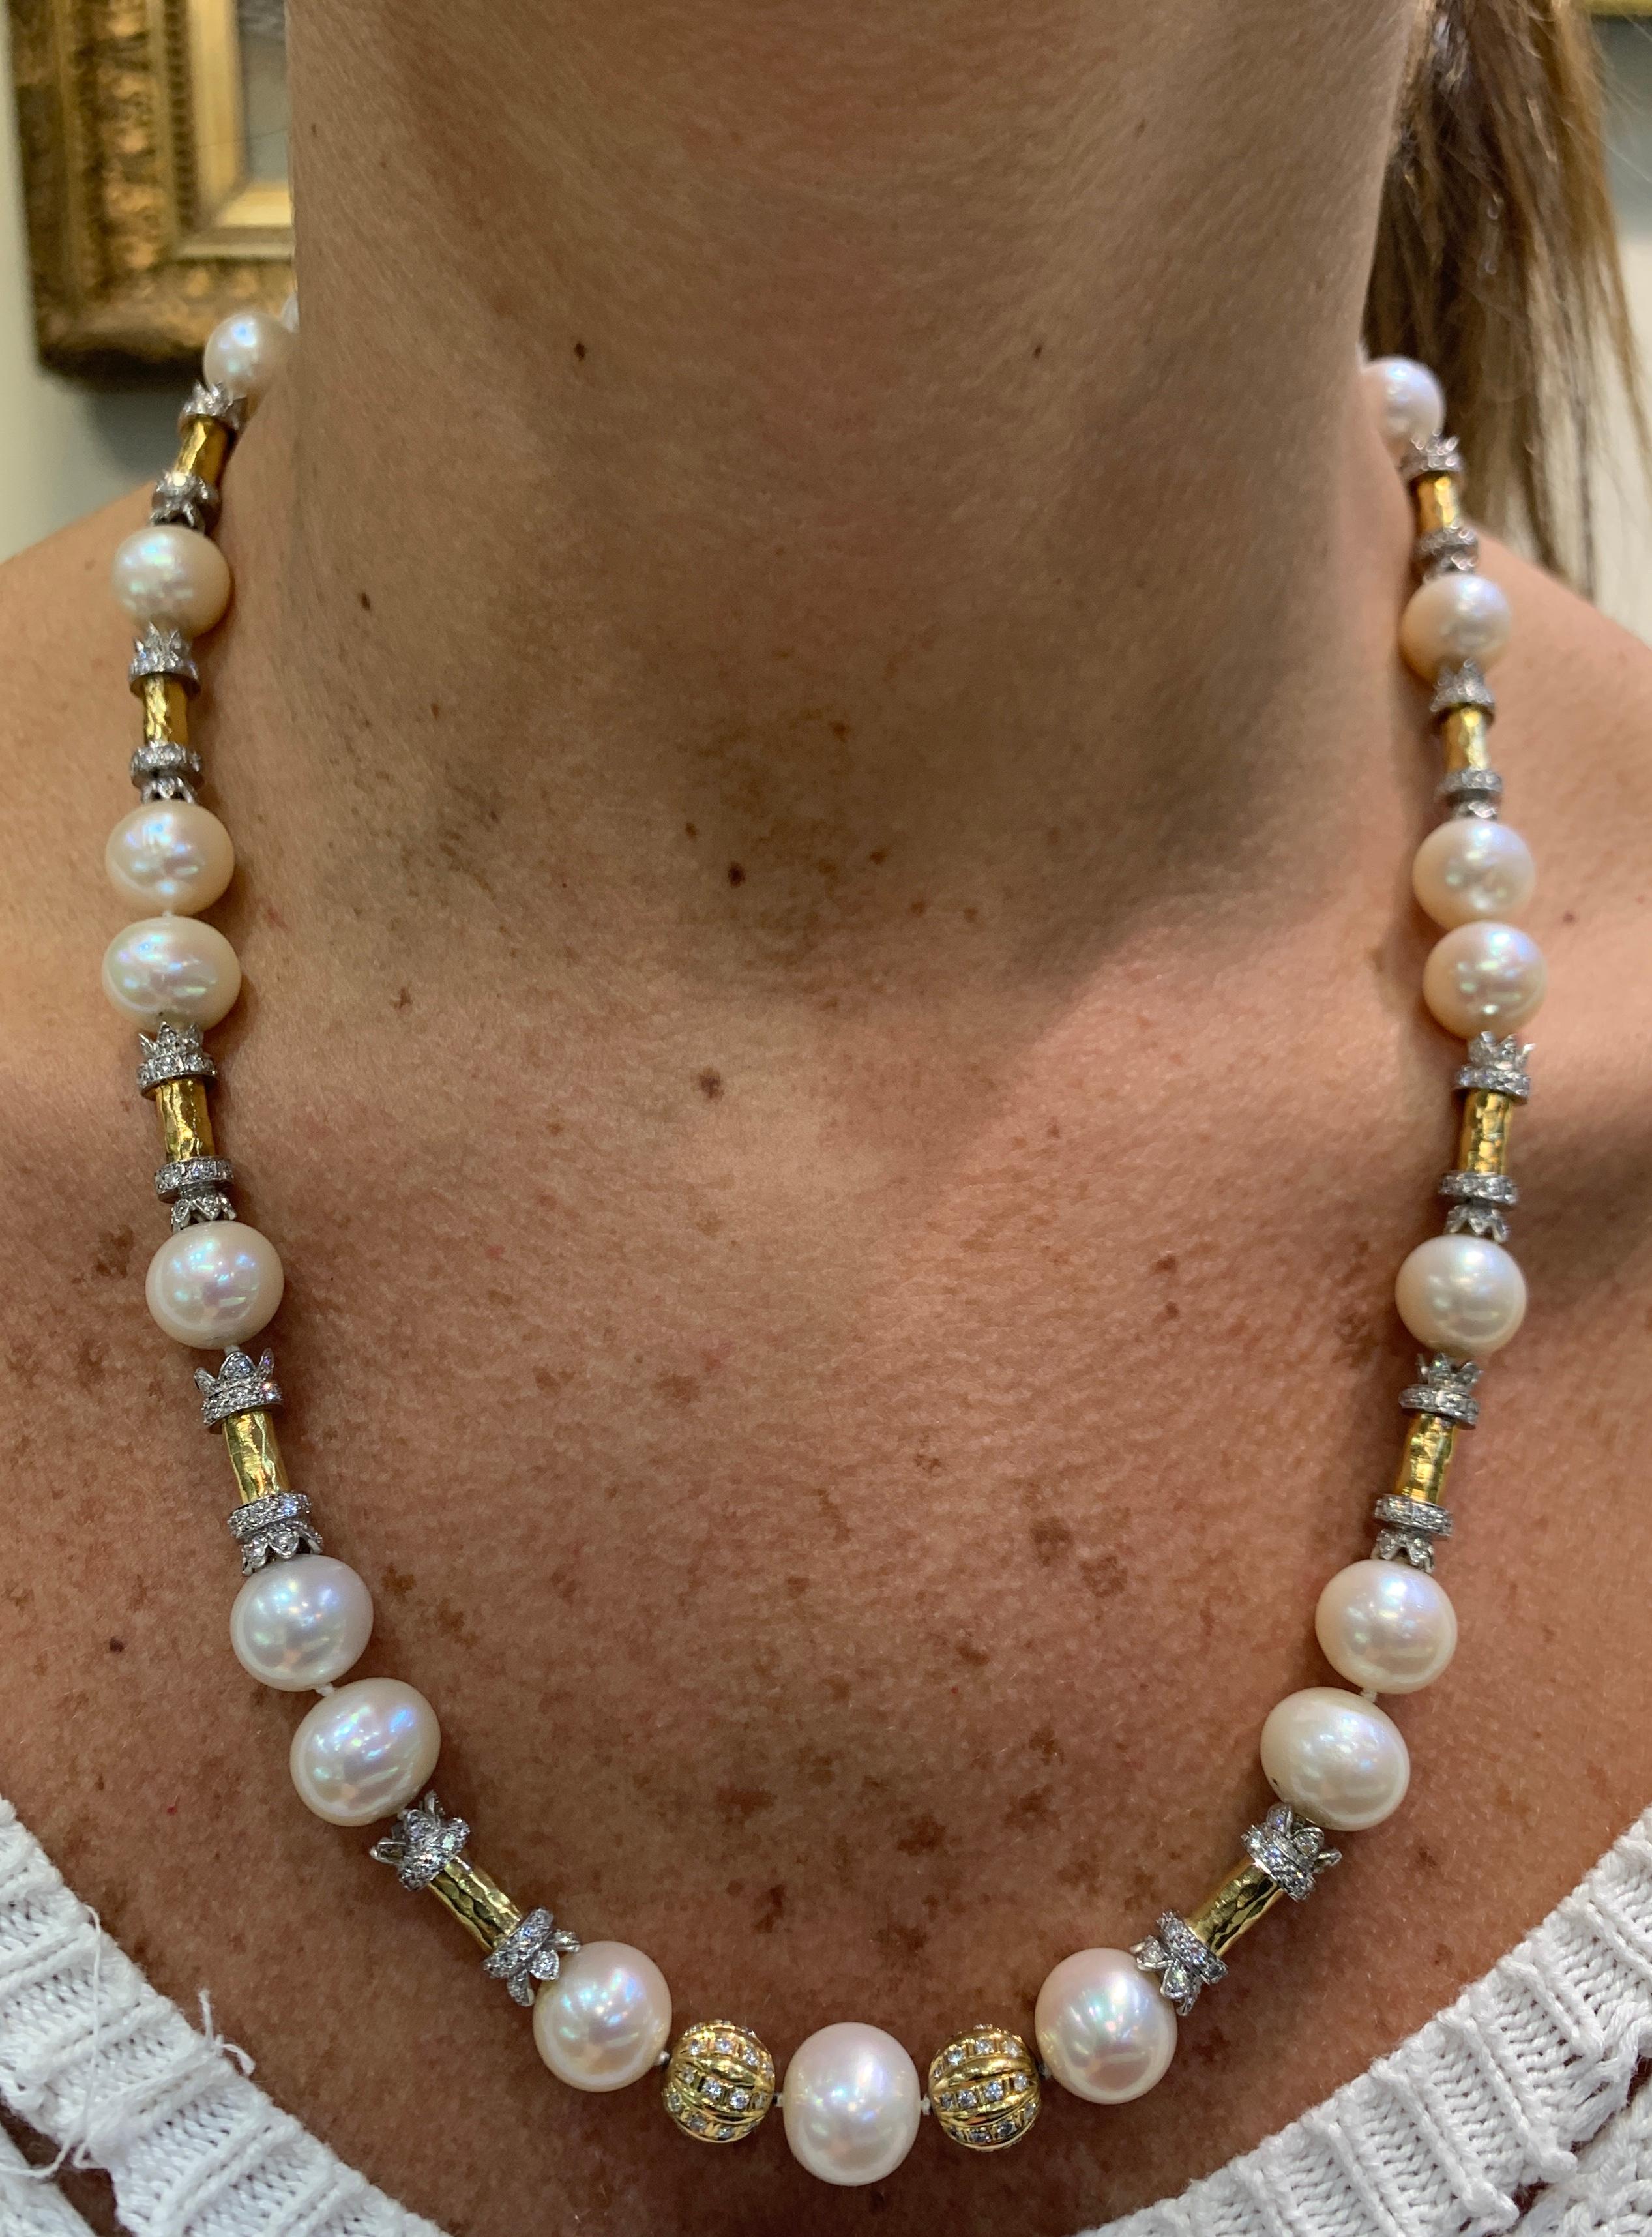 Hammered Gold and Diamond Pearl Necklace
27 cultured pearls 
400 round cut diamonds 
Measurements: 20